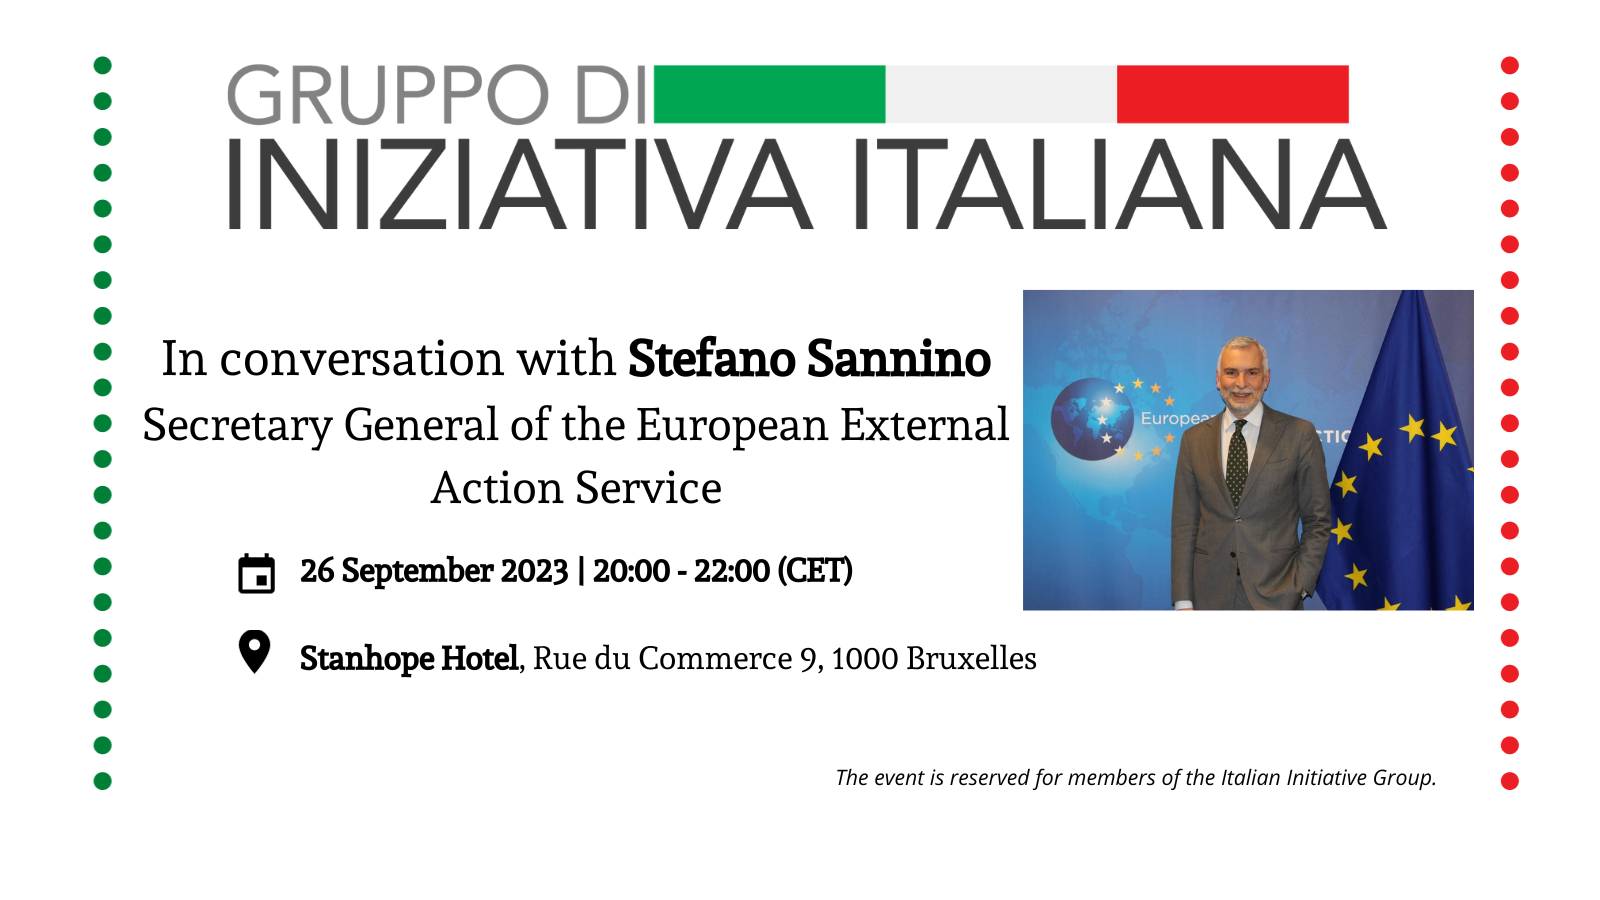 In conversation with Stefano Sannino | Secretary General of the European External Action Service